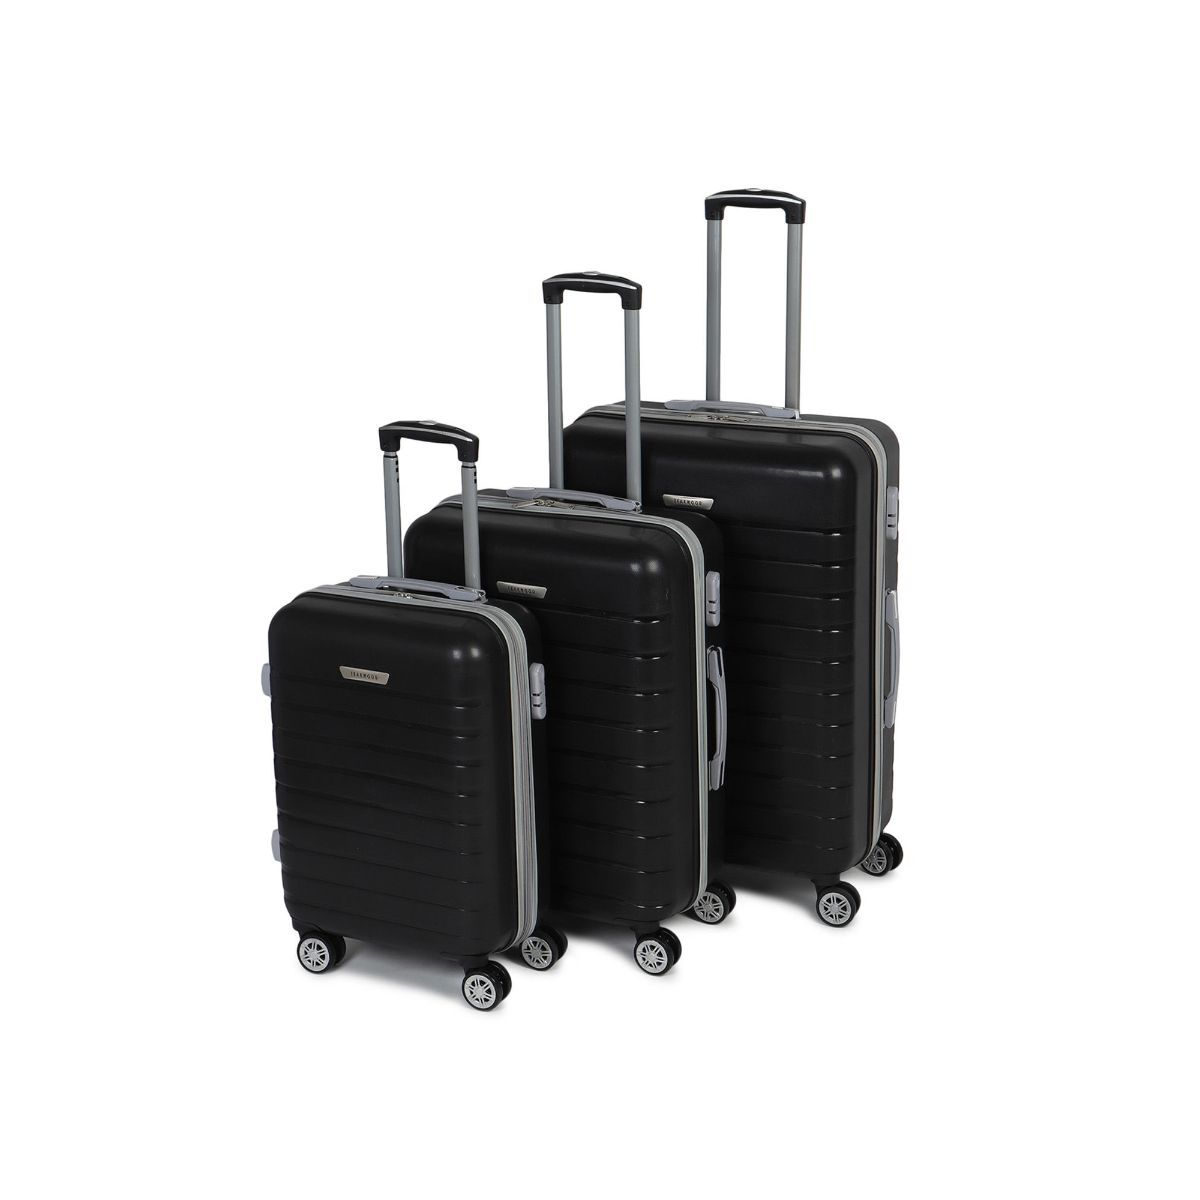 NASHER MILES HardSide Polycarbonate Luggage Set of 2 Black Trolley Bag Bags  65  75 Cm Expandable Checkin Suitcase  28 inch Black  Price in India   Flipkartcom